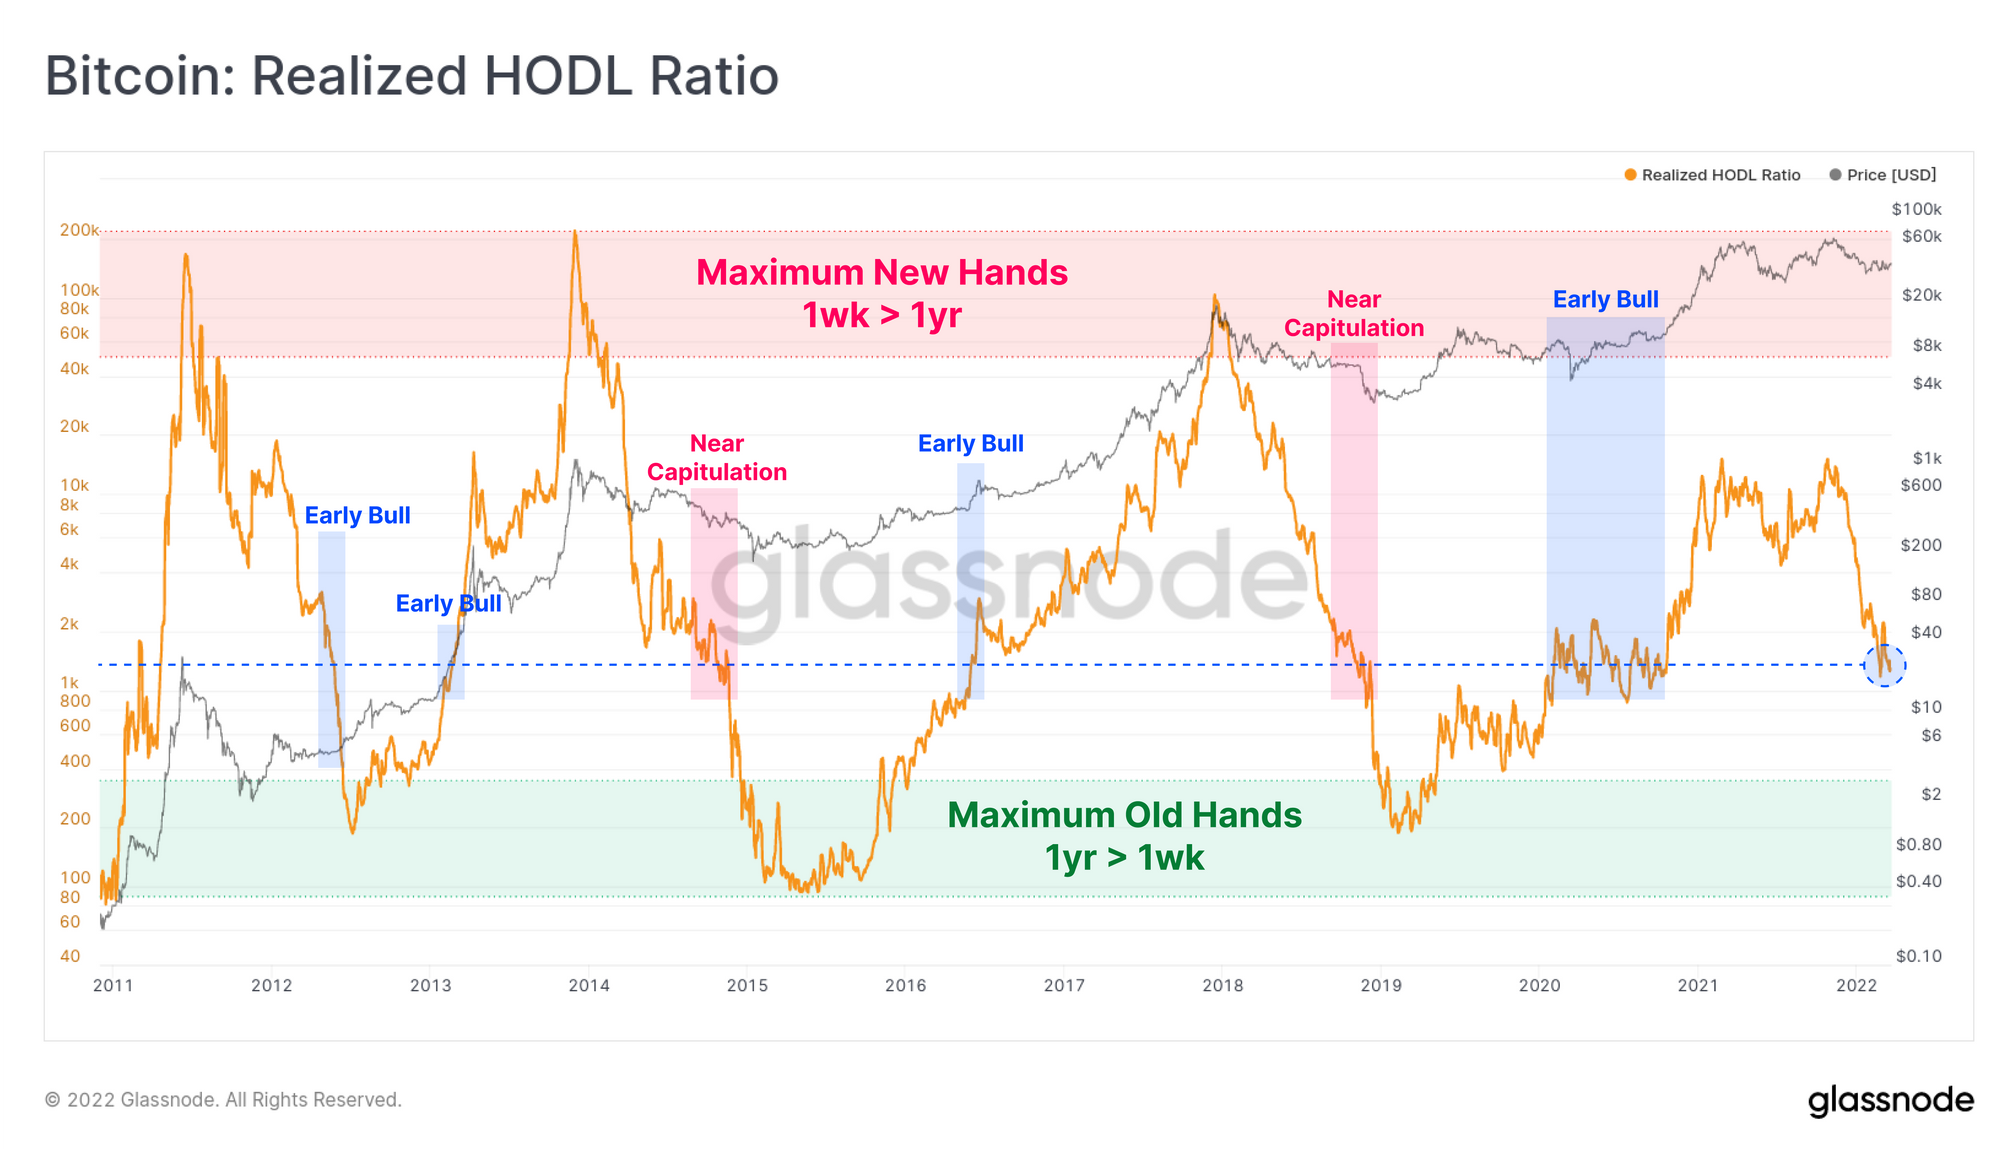 Realized HODL Ratio for Bitcoin